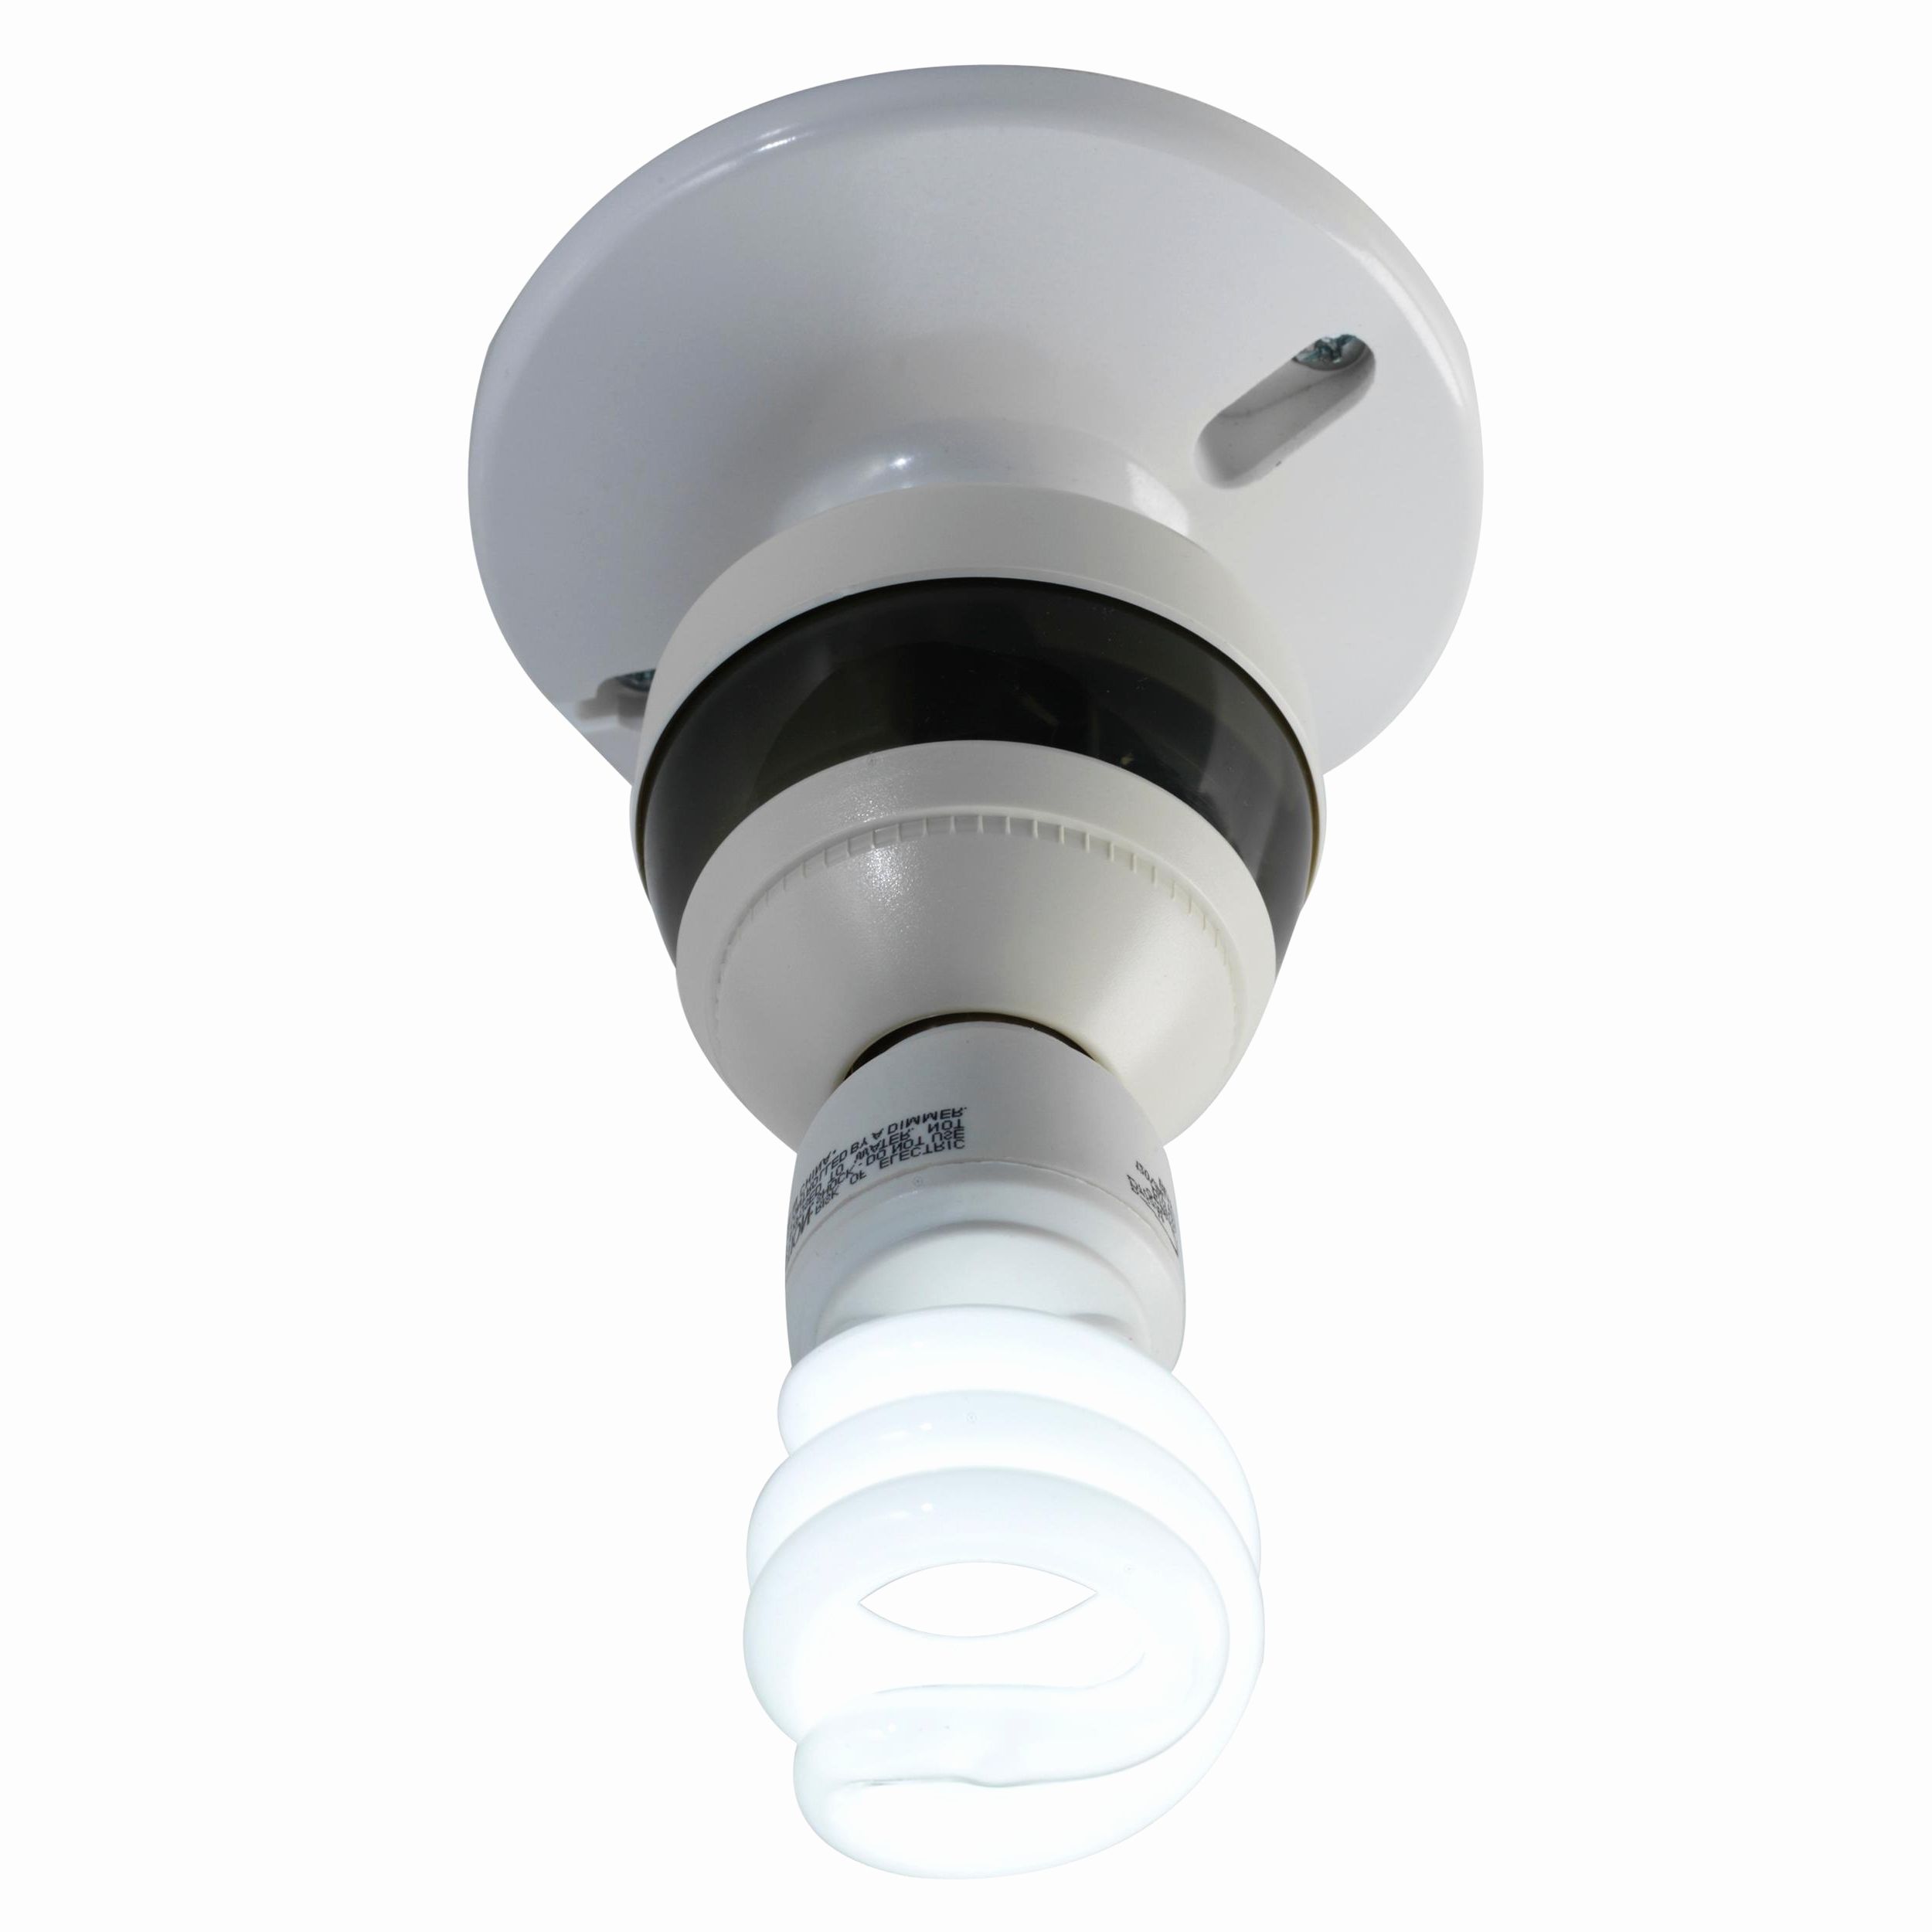 Outdoor Ceiling Fans With Motion Sensor Light In Newest Interior Motion Sensor Ceiling Light Great Outdoor Ceiling Fan With (View 13 of 20)